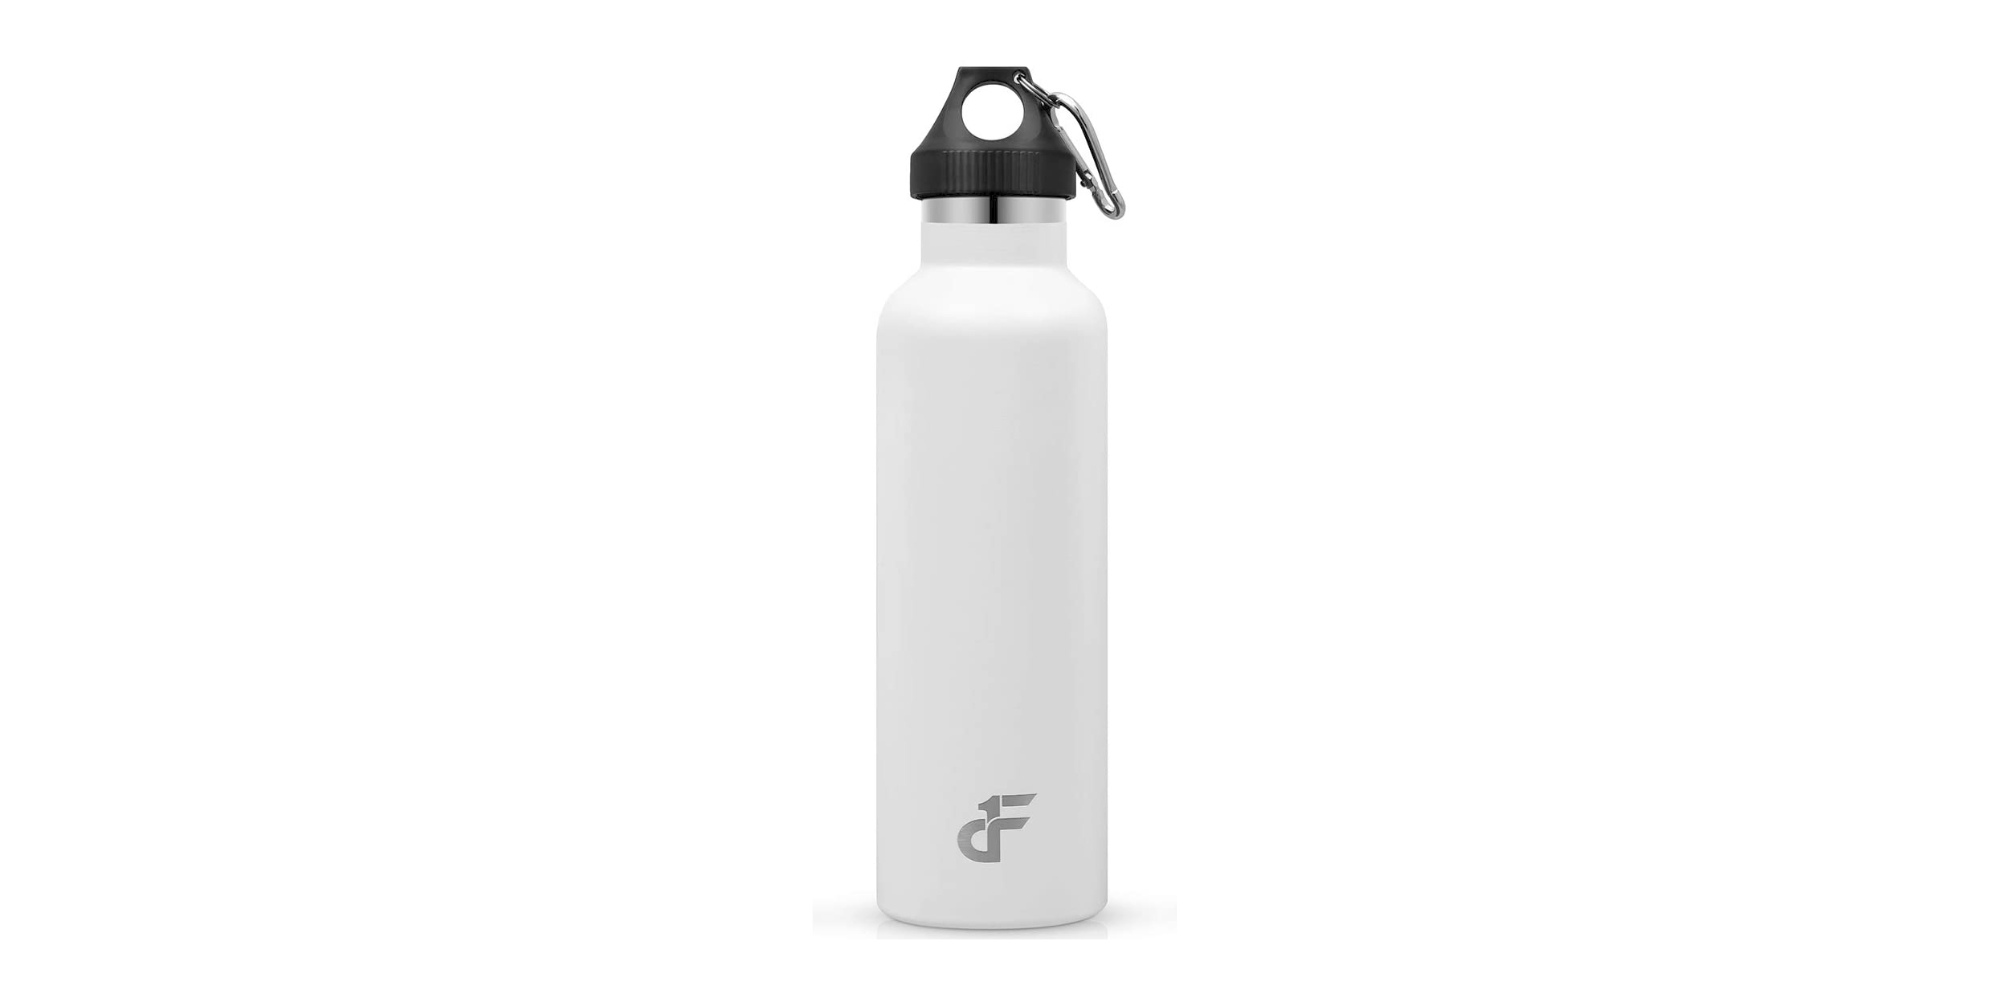 This stainless steel 24-ounce water bottle is yours for $6.50